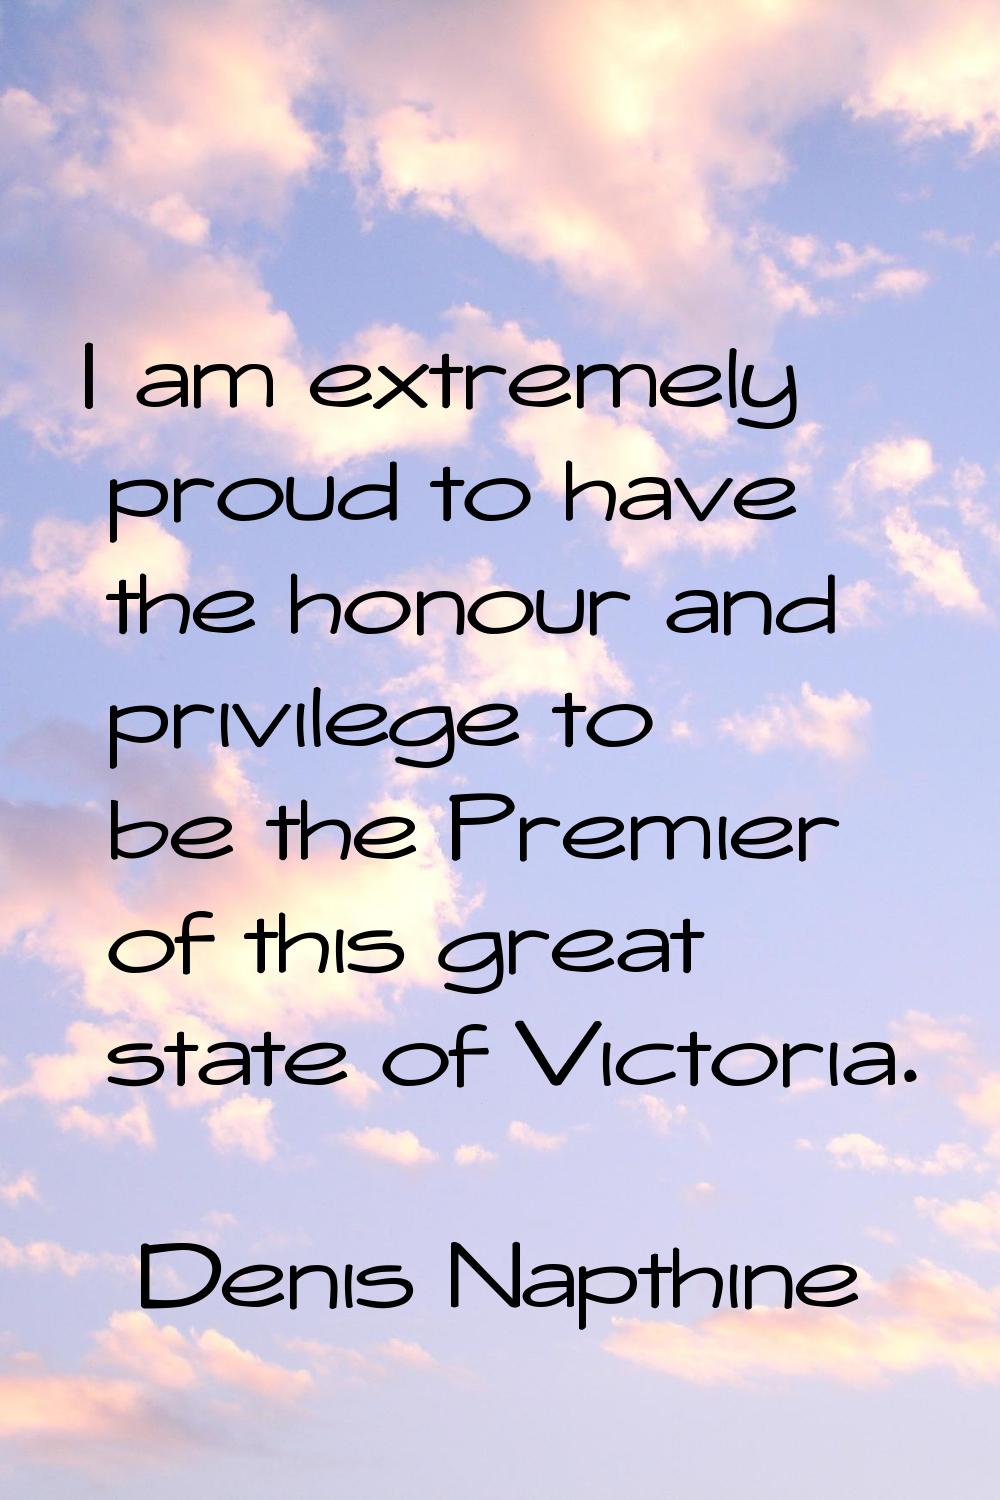 I am extremely proud to have the honour and privilege to be the Premier of this great state of Vict